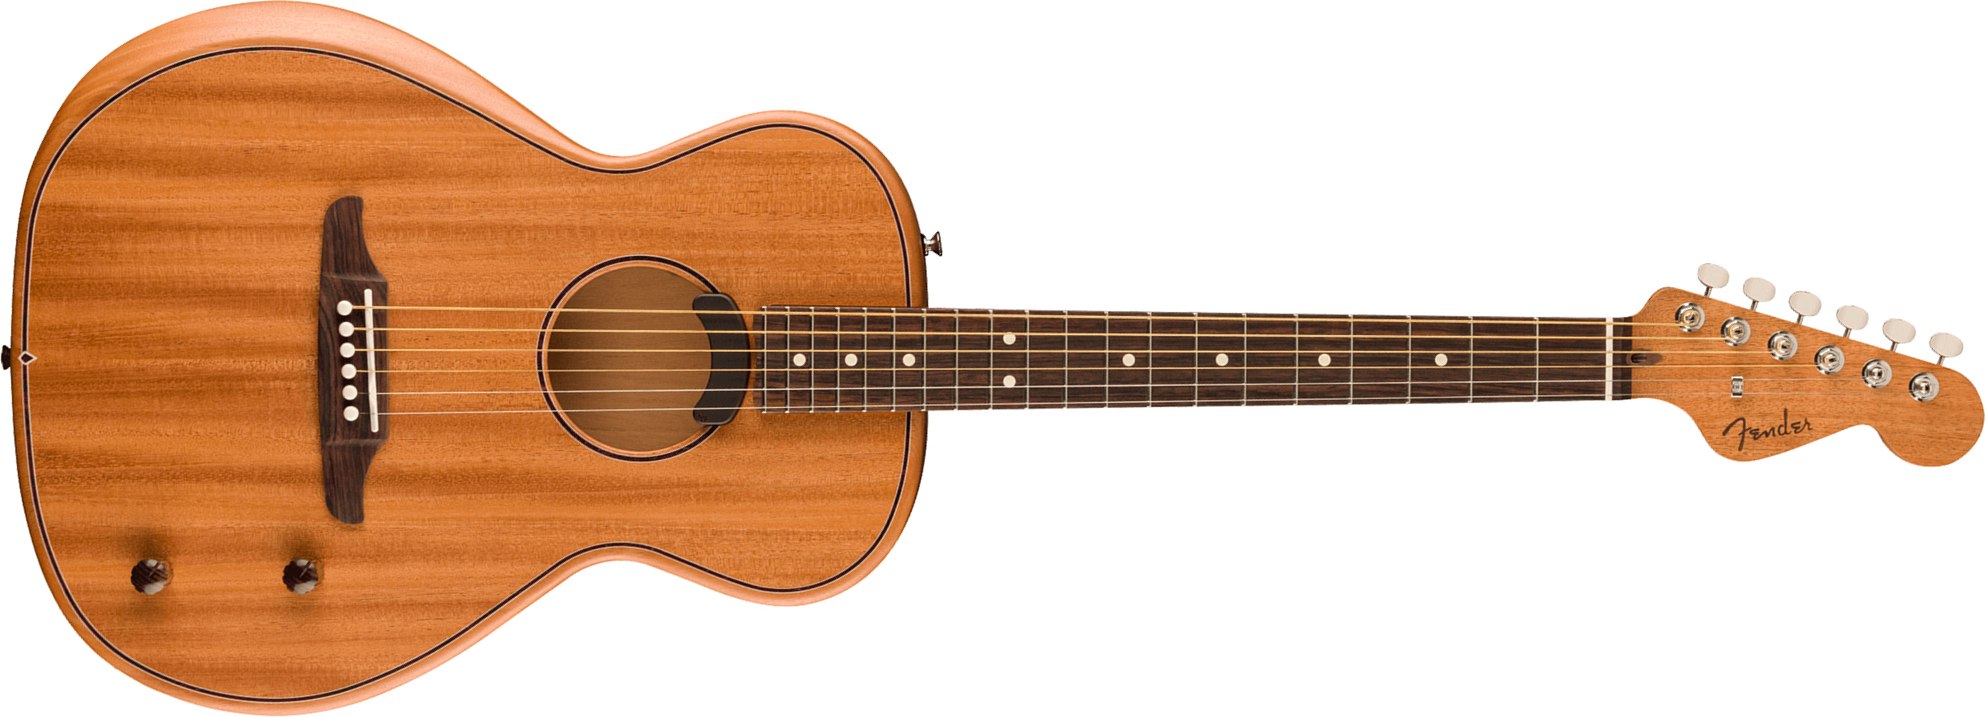 Fender Highway All Mahogany Parlor Thin Mex Acajou Epicea Rw - Natural Satin Matte - Electro acoustic guitar - Main picture